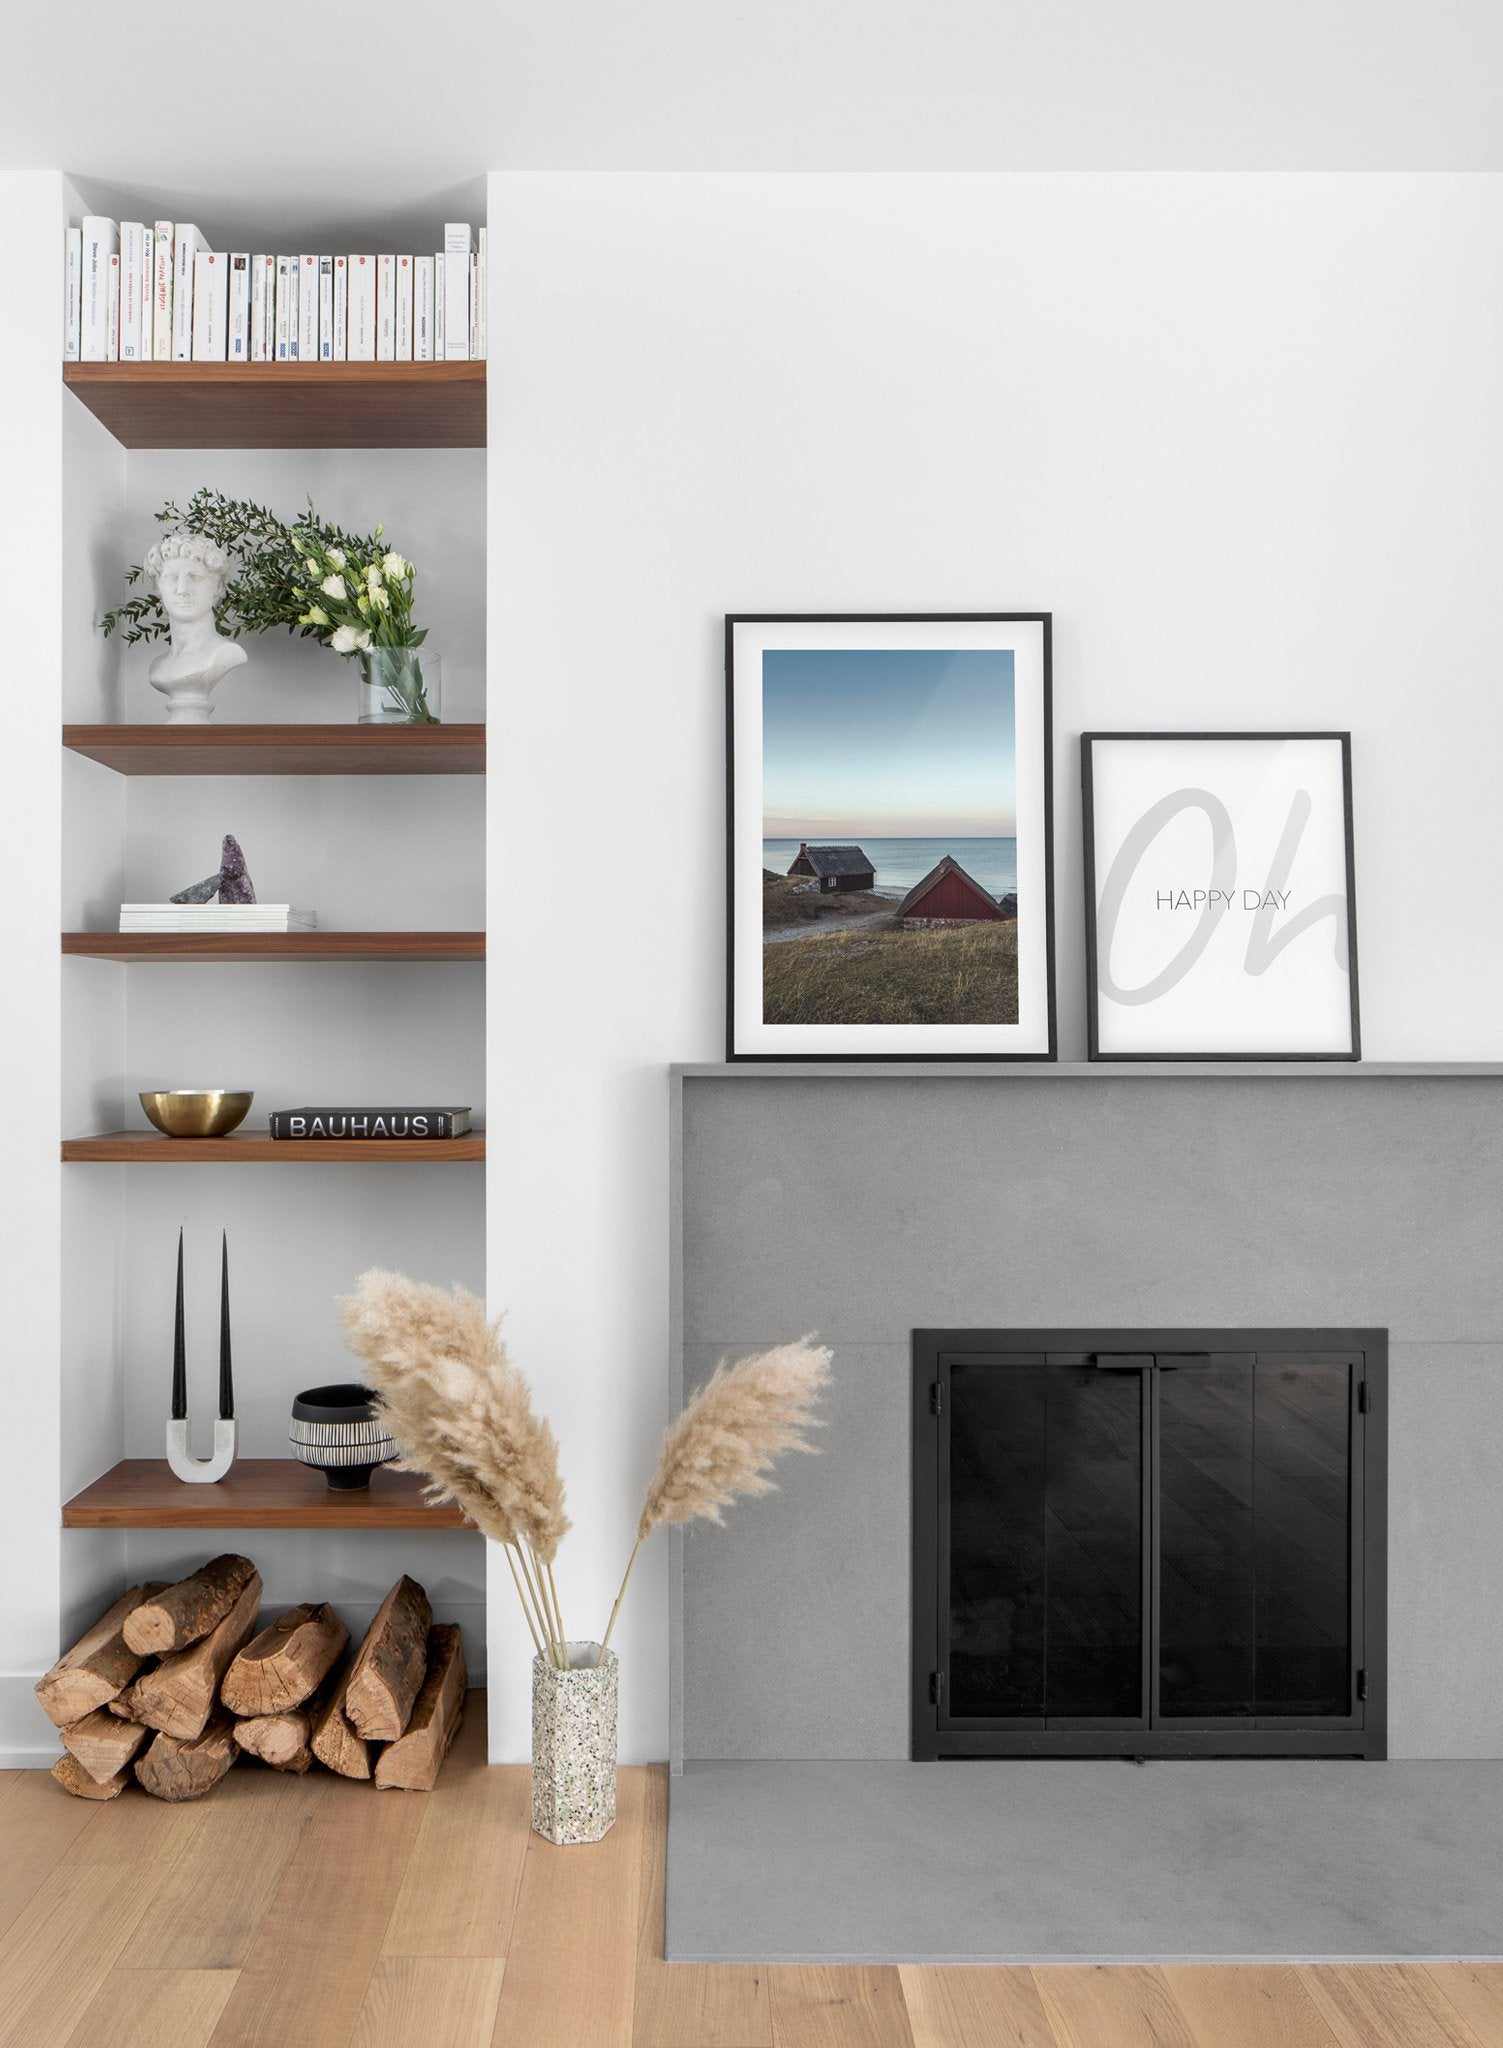 Seaside Village modern minimalist photography poster by Opposite Wall - Living room with fireplace - duo